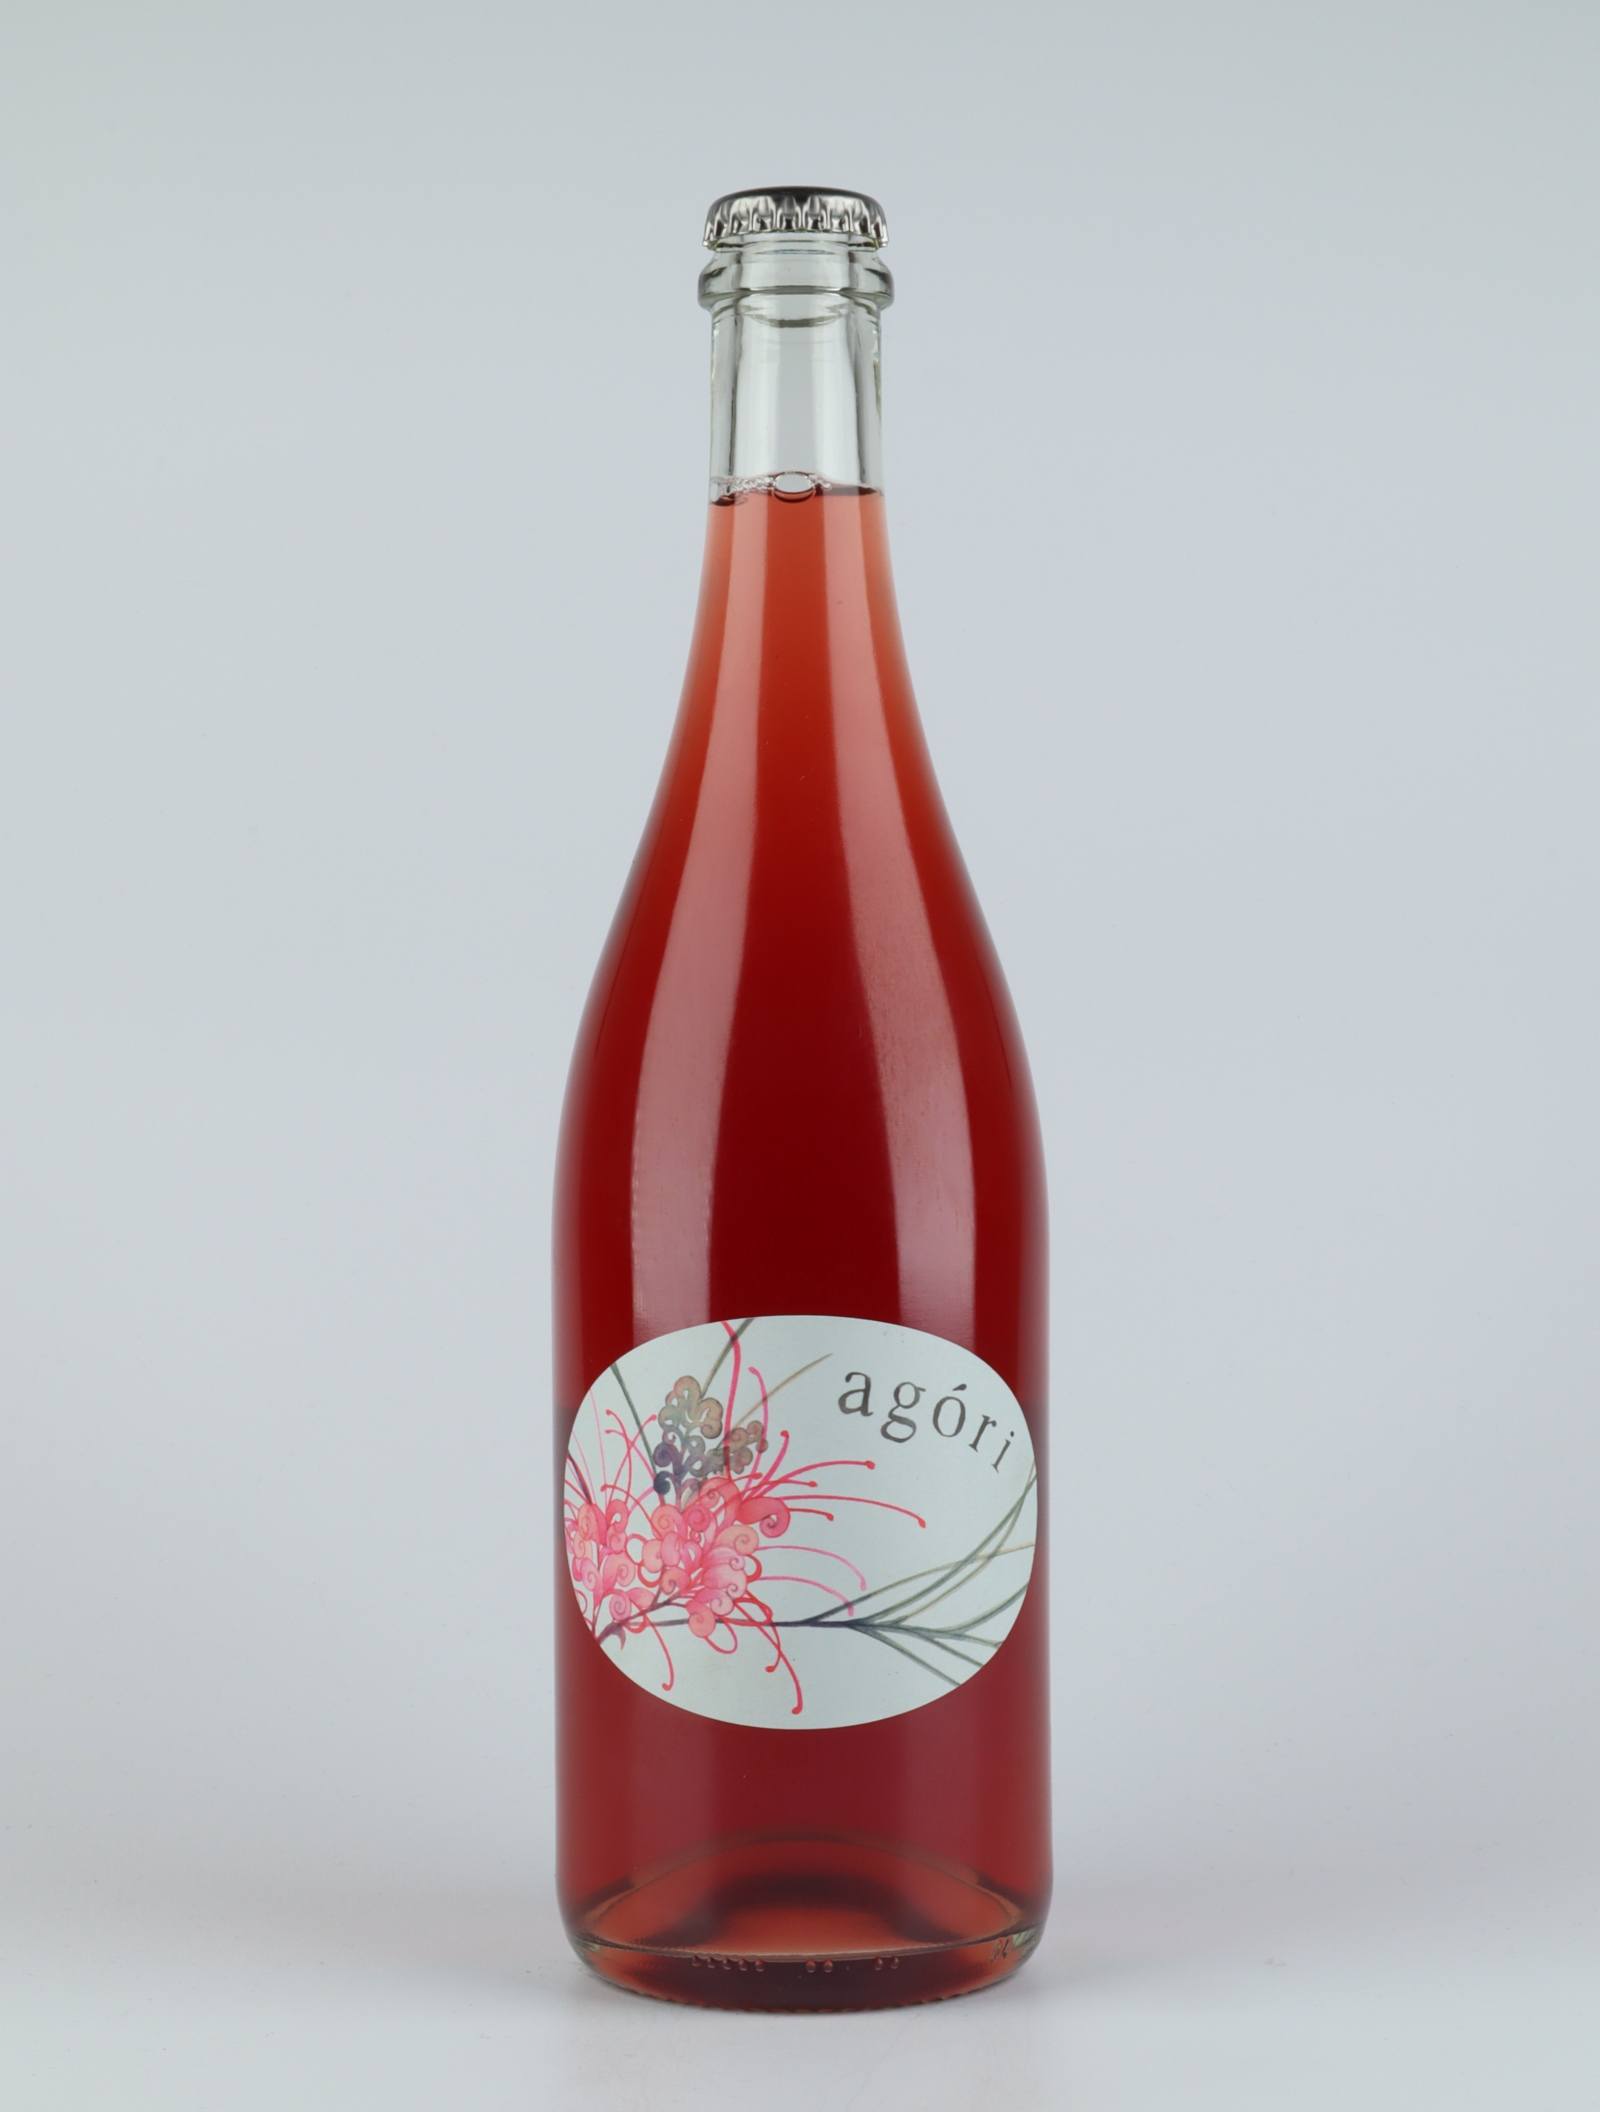 A bottle 2019 Agori Rosé Rosé from Travis Tausend, Adelaide Hills in 